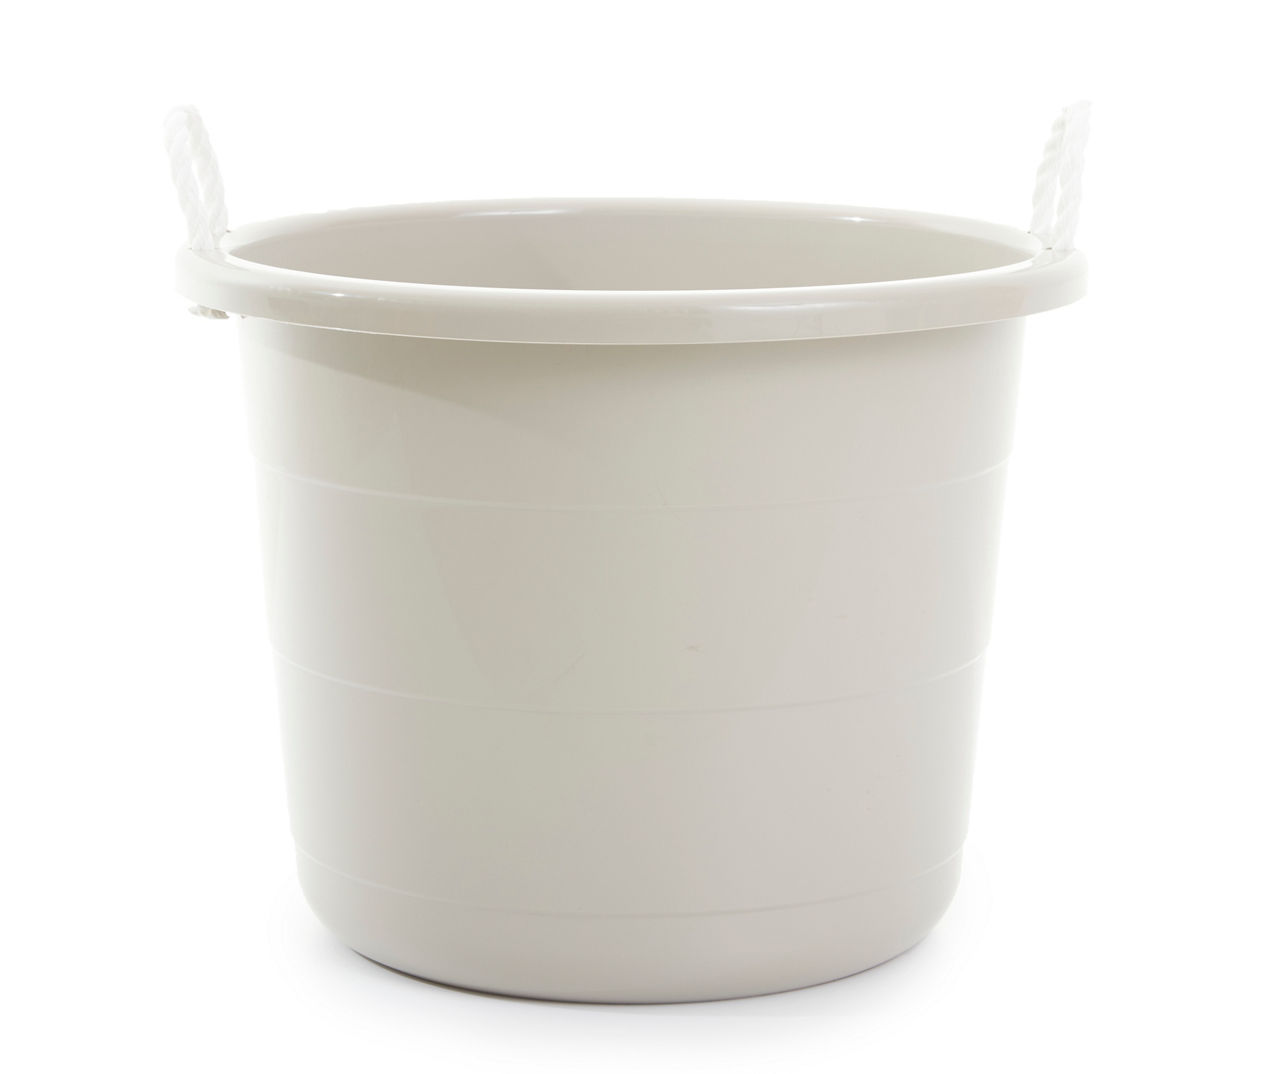 Mainstays Flexible Tub with Rope Handles - Blue - 17 Gal